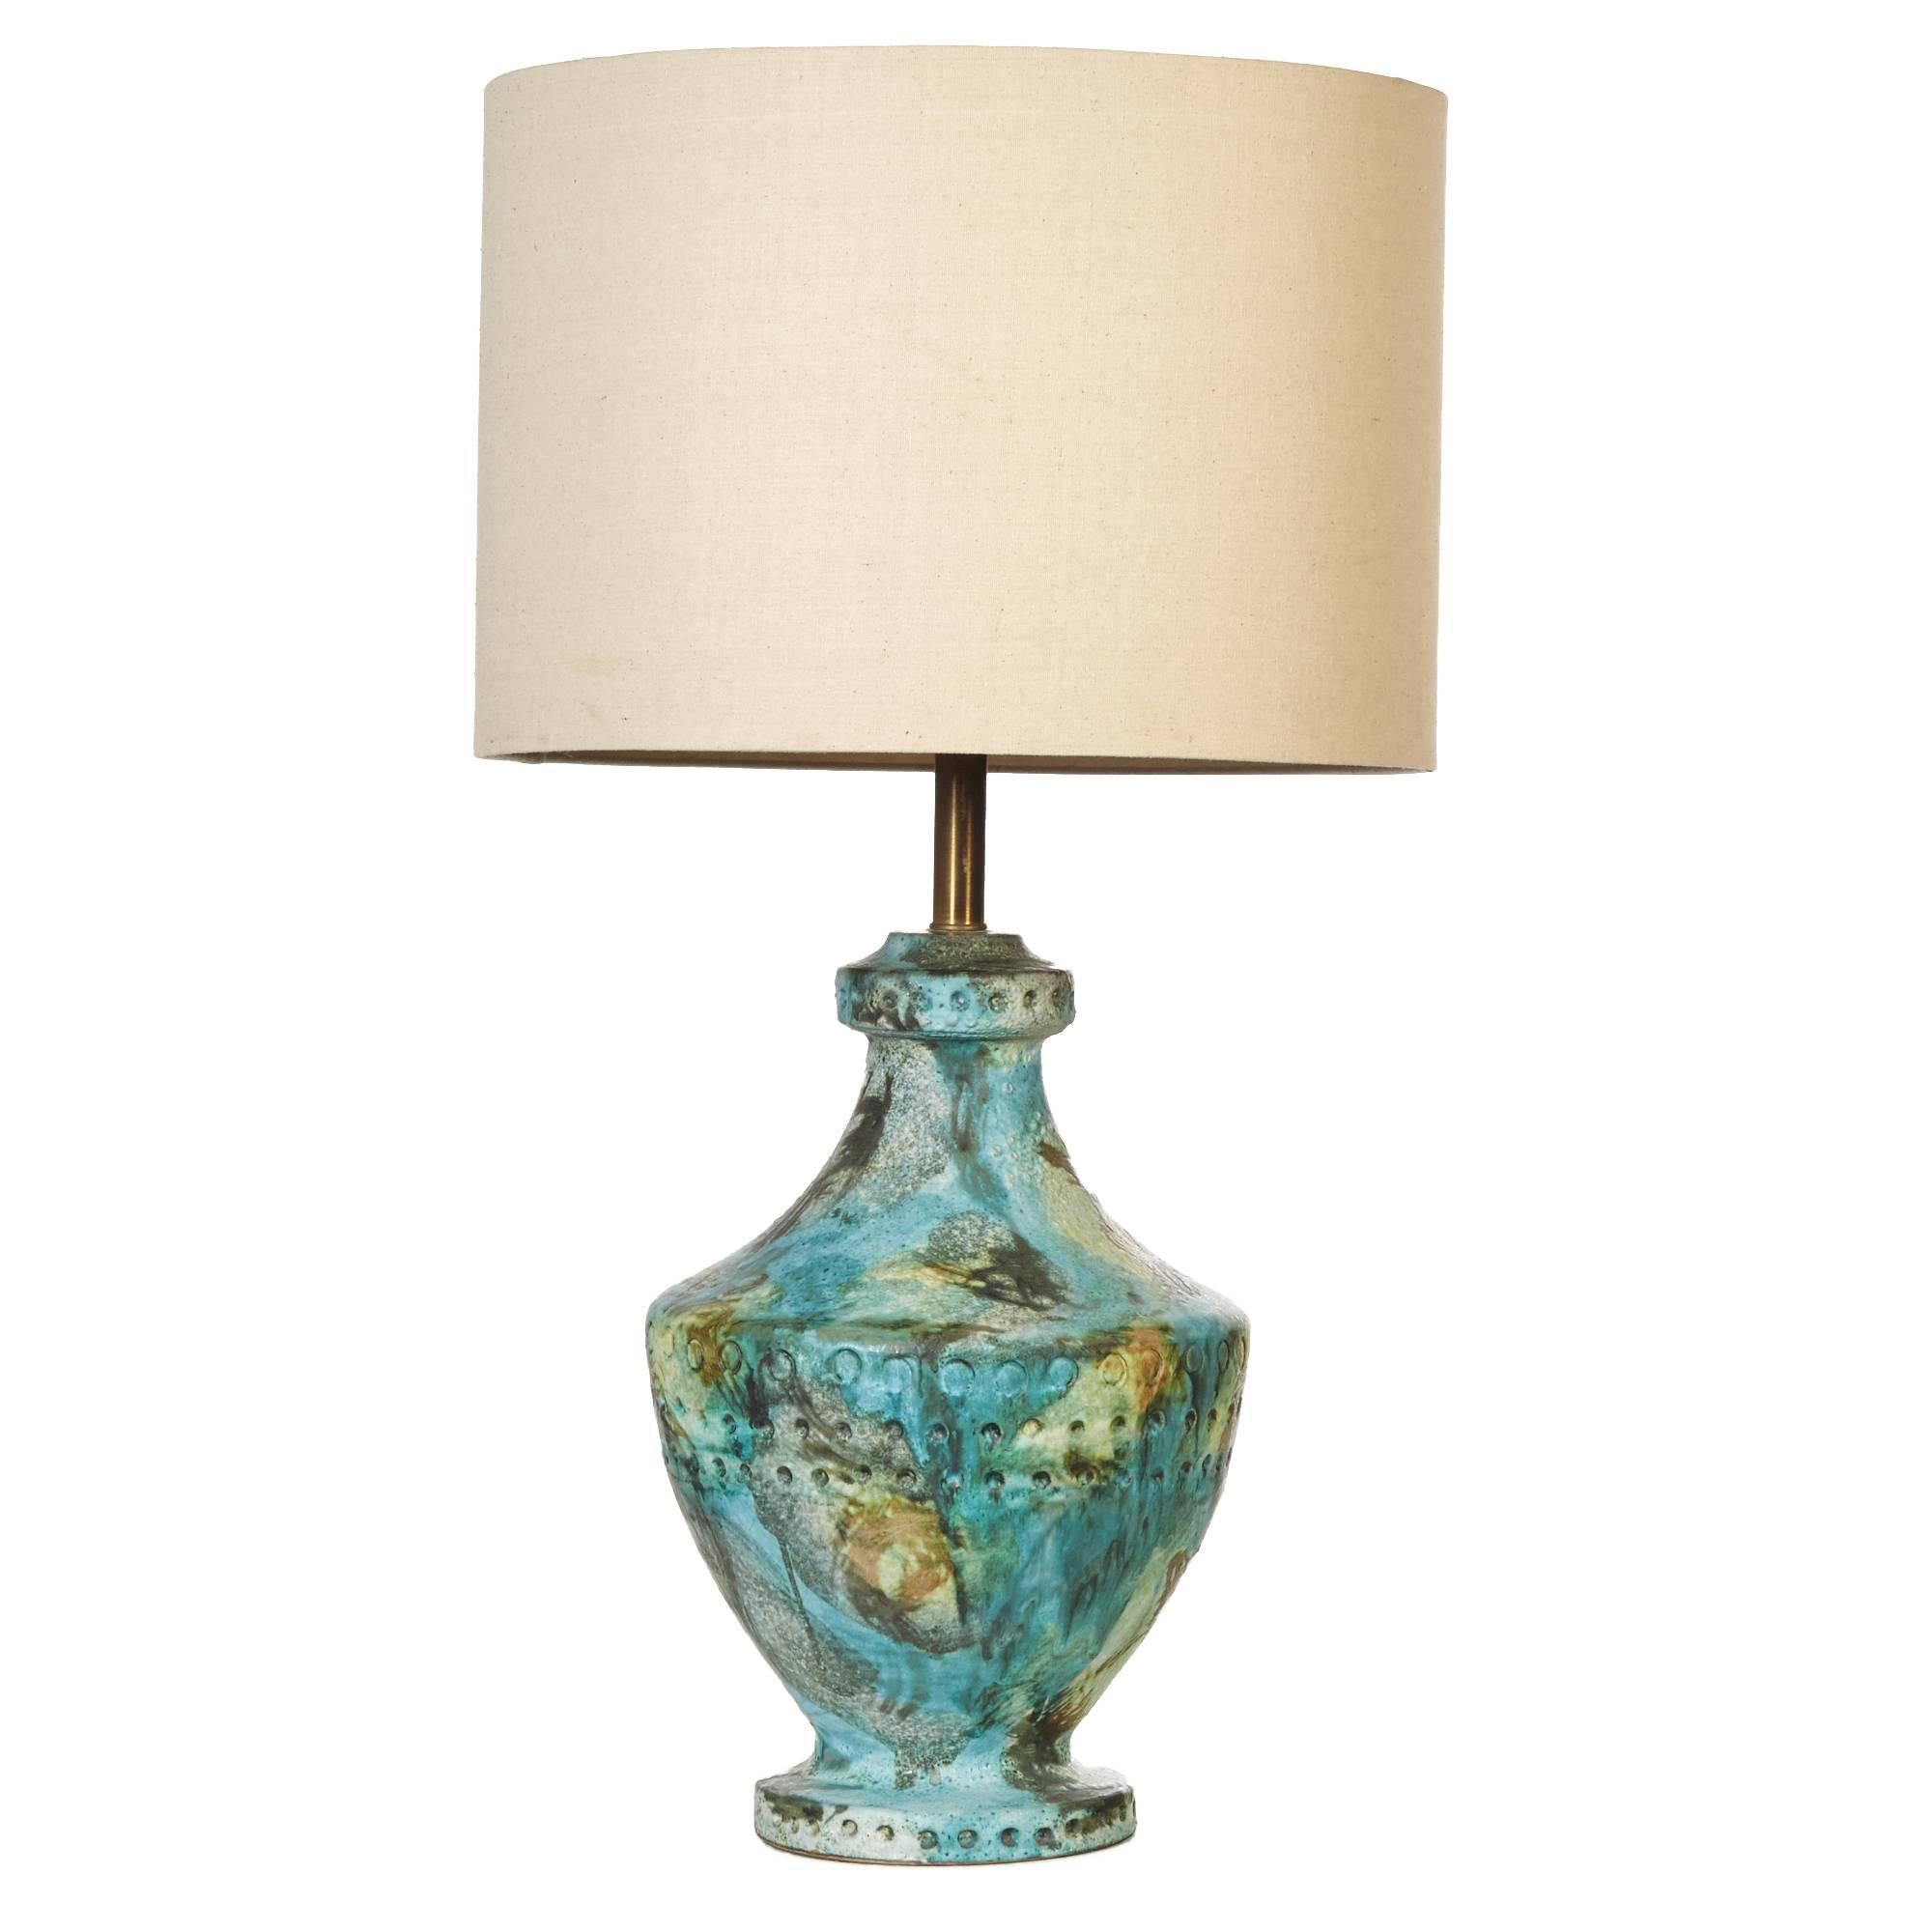 Bitossi Style Volcanic Glaze Table Lamp, 1960s For Sale